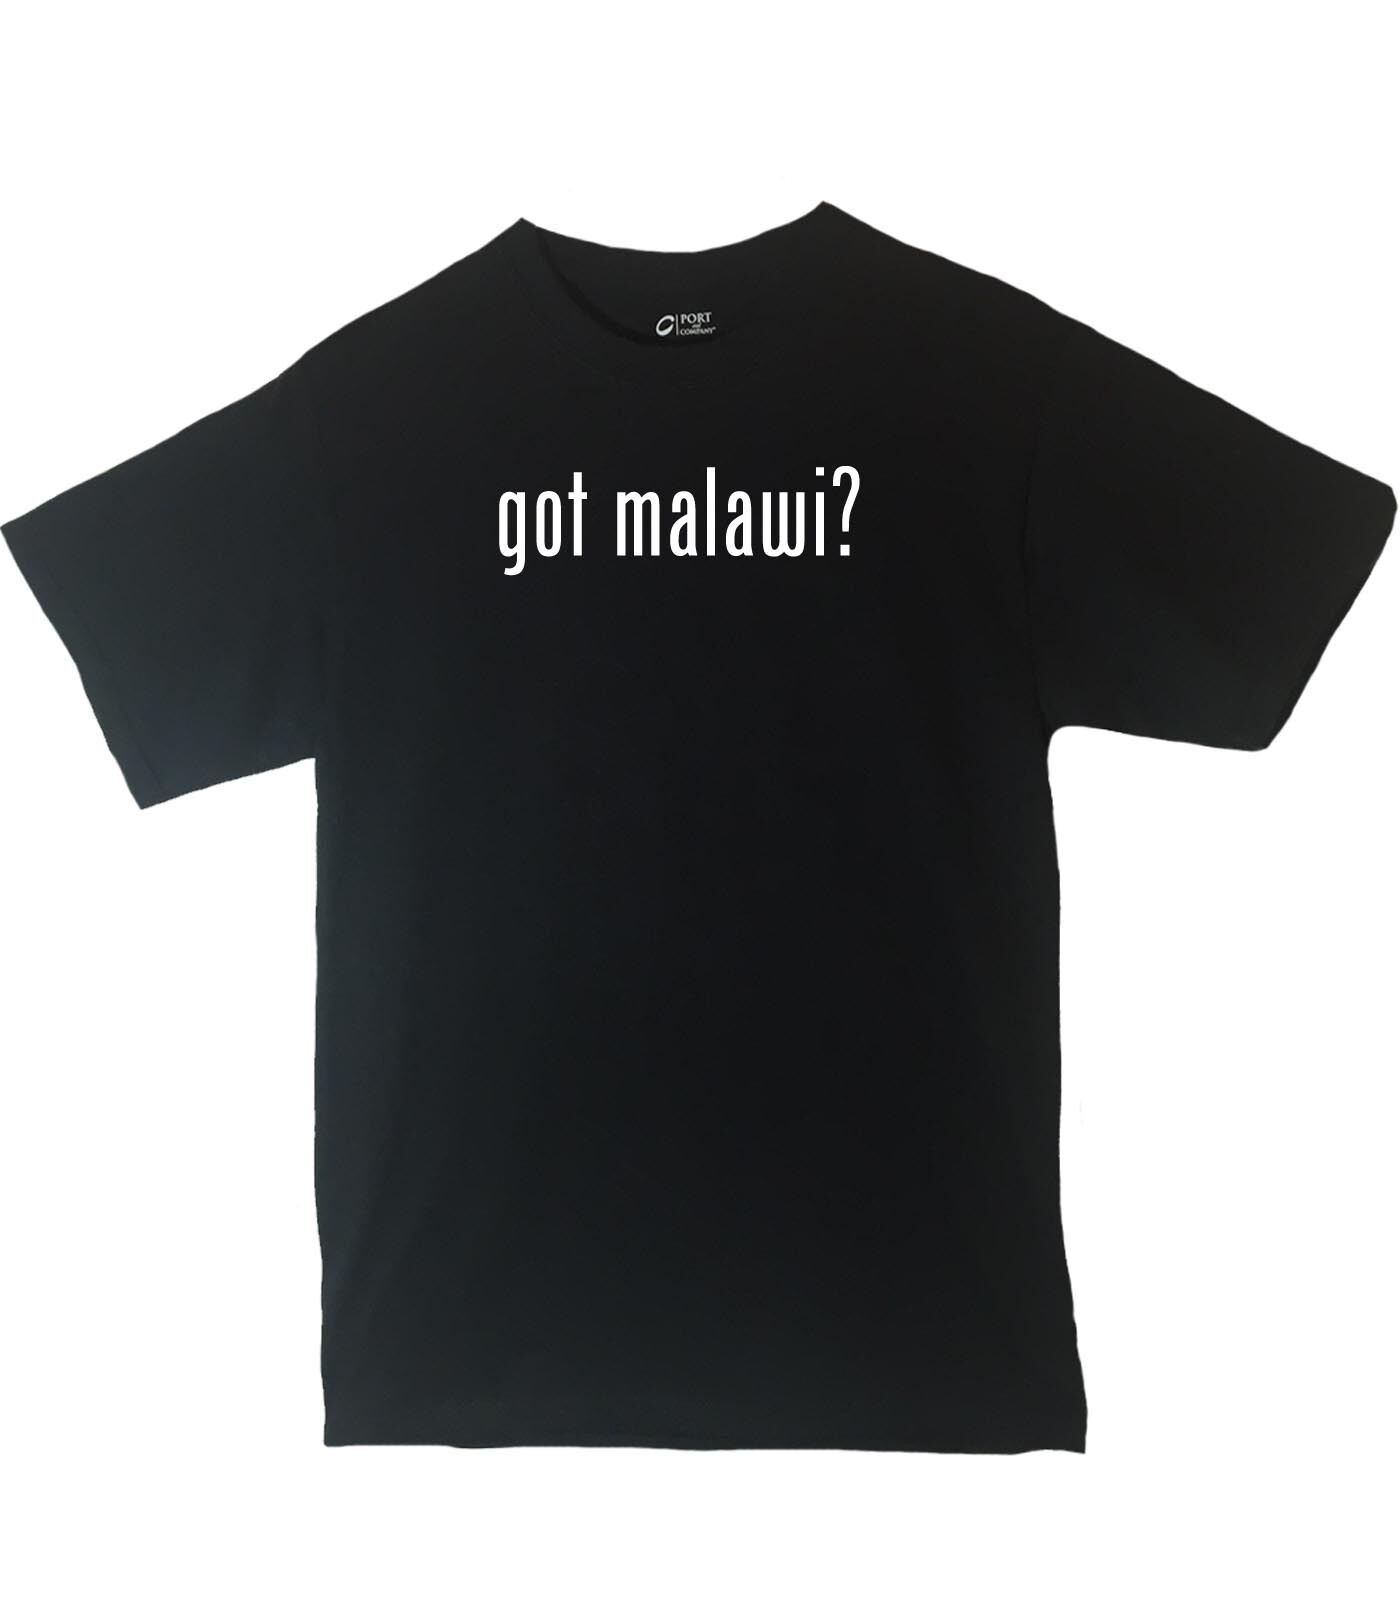 Got Malawi? Shirt Country Pride Shirt Different Print Colors Inside